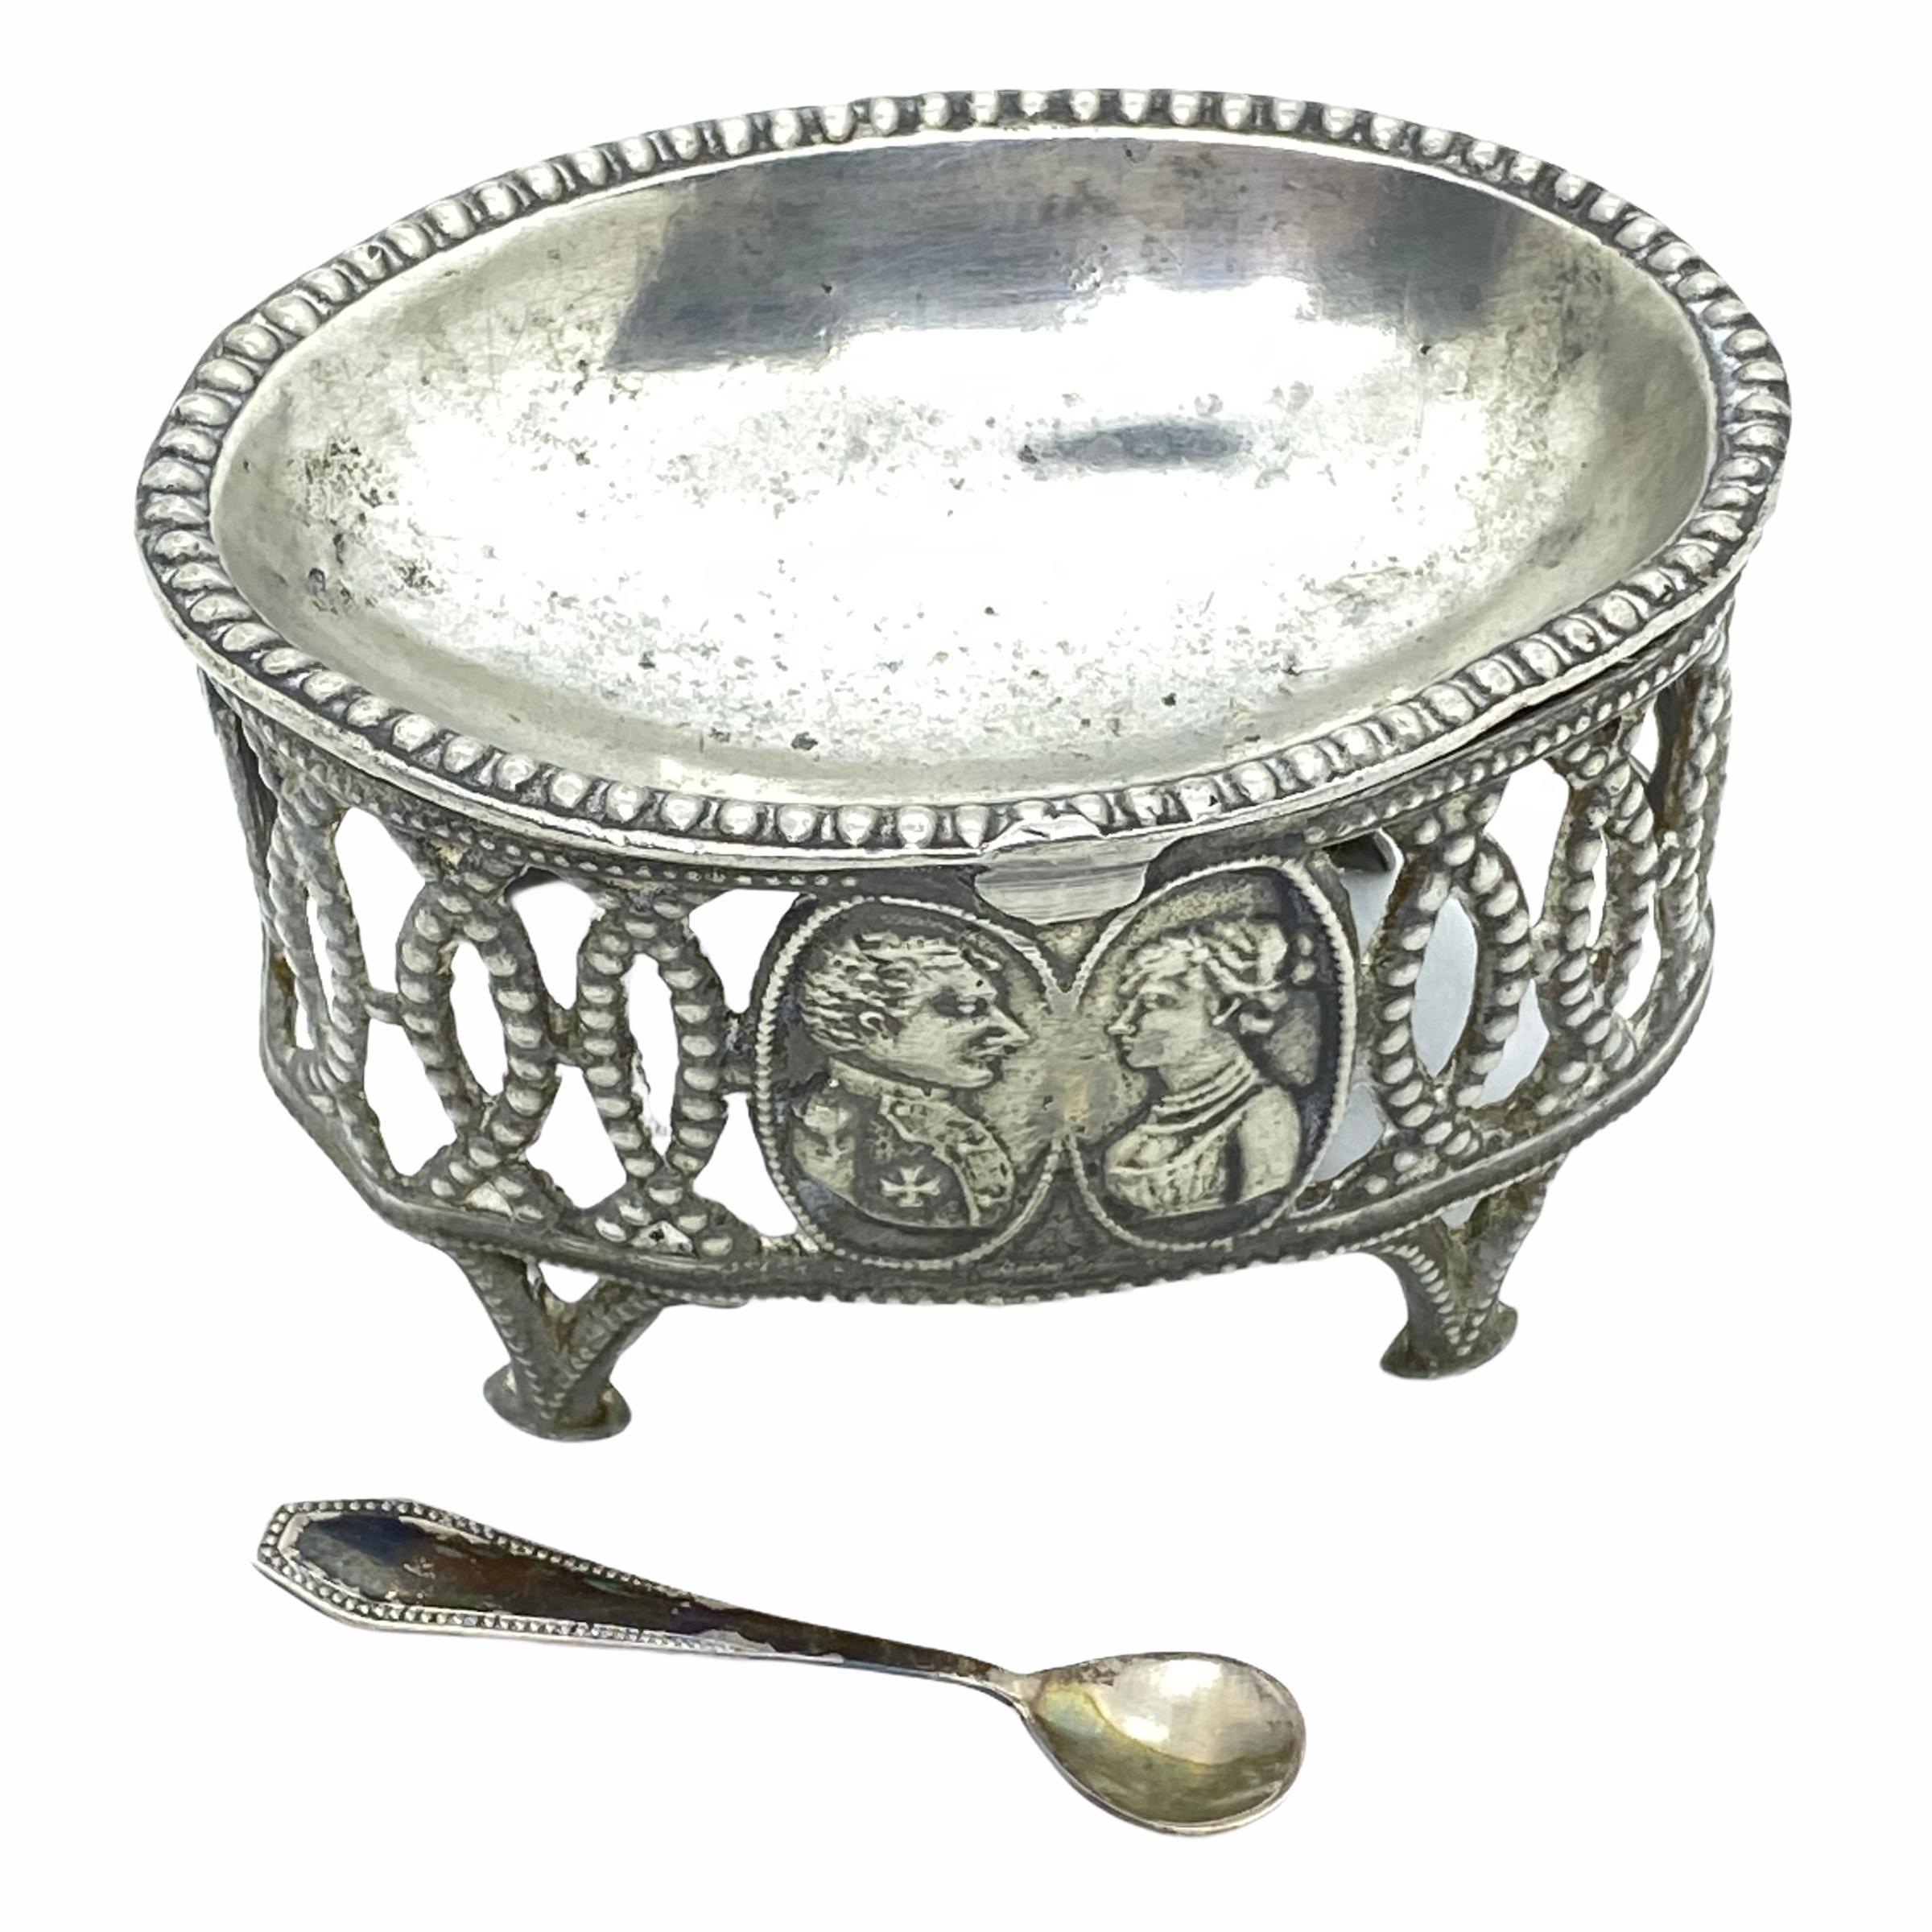 Gorgeous silver plated, 1880s small open salt or spice pot with a cute little spoon. Found at an estate sale in Vienna, Austria.